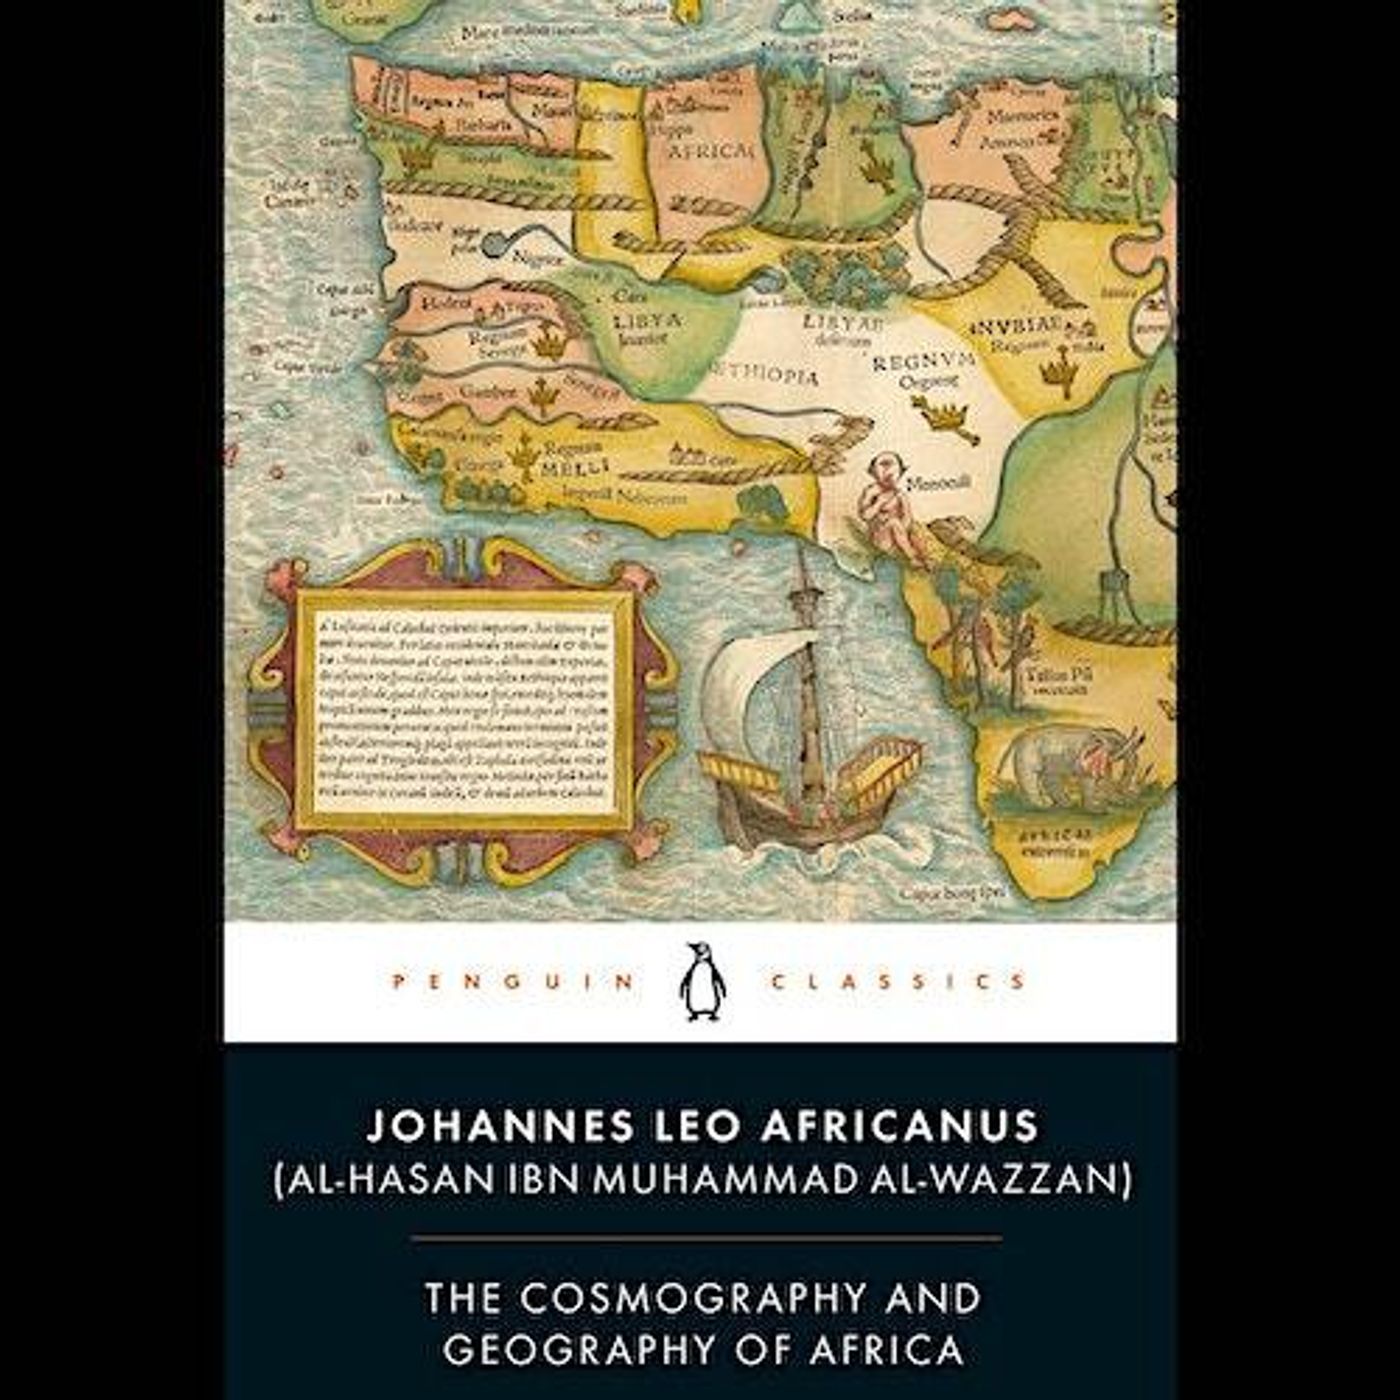 Anthony Ossa-Richardson & Richard J Oosterhoff: The Cosmography and Geography of Africa